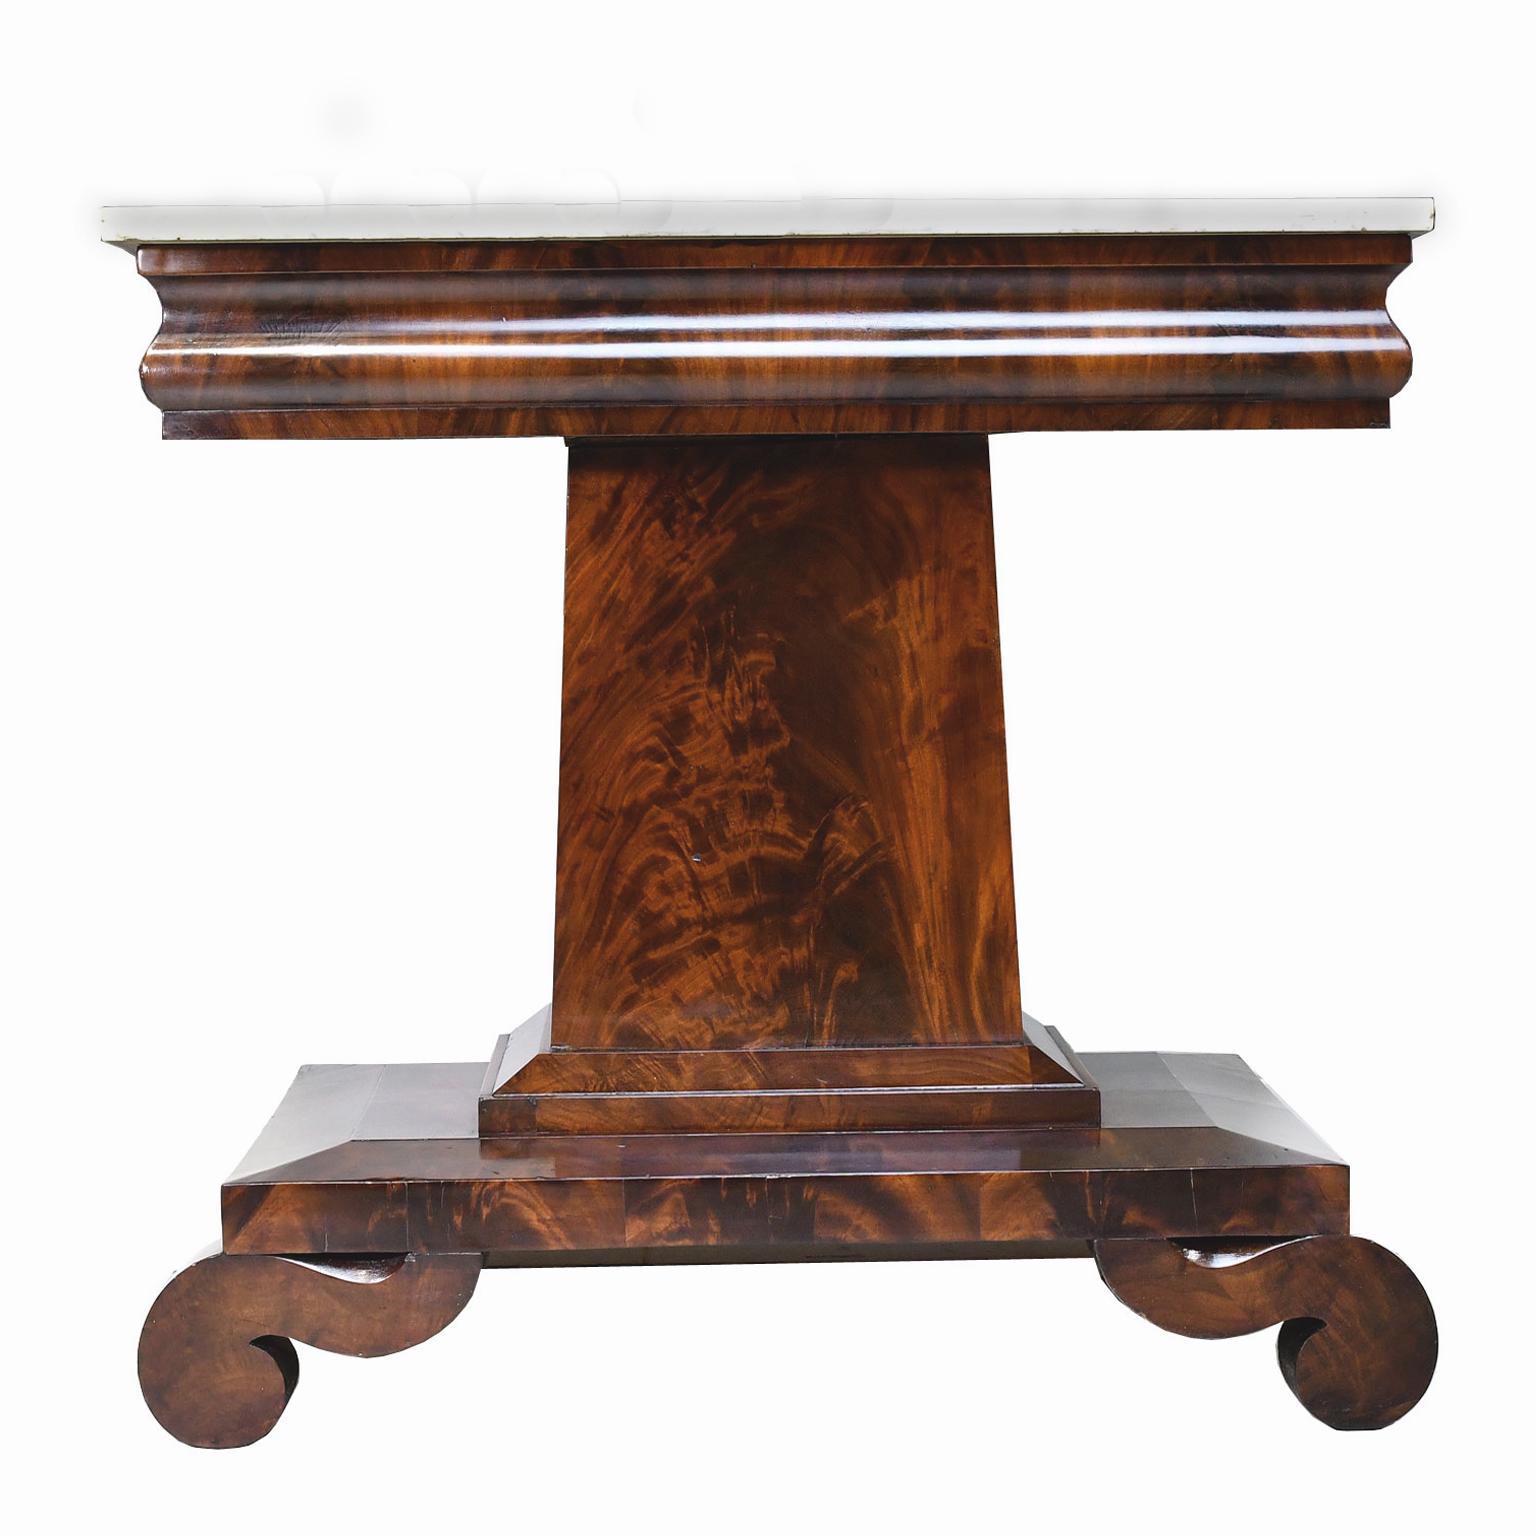 A handsome Empire console table in Fine West Indies mahogany in the Grecian style with square column resting on a beveled base with scroll feet, and original white Carrara marble top, New York City, circa 1820. In the school of Joseph